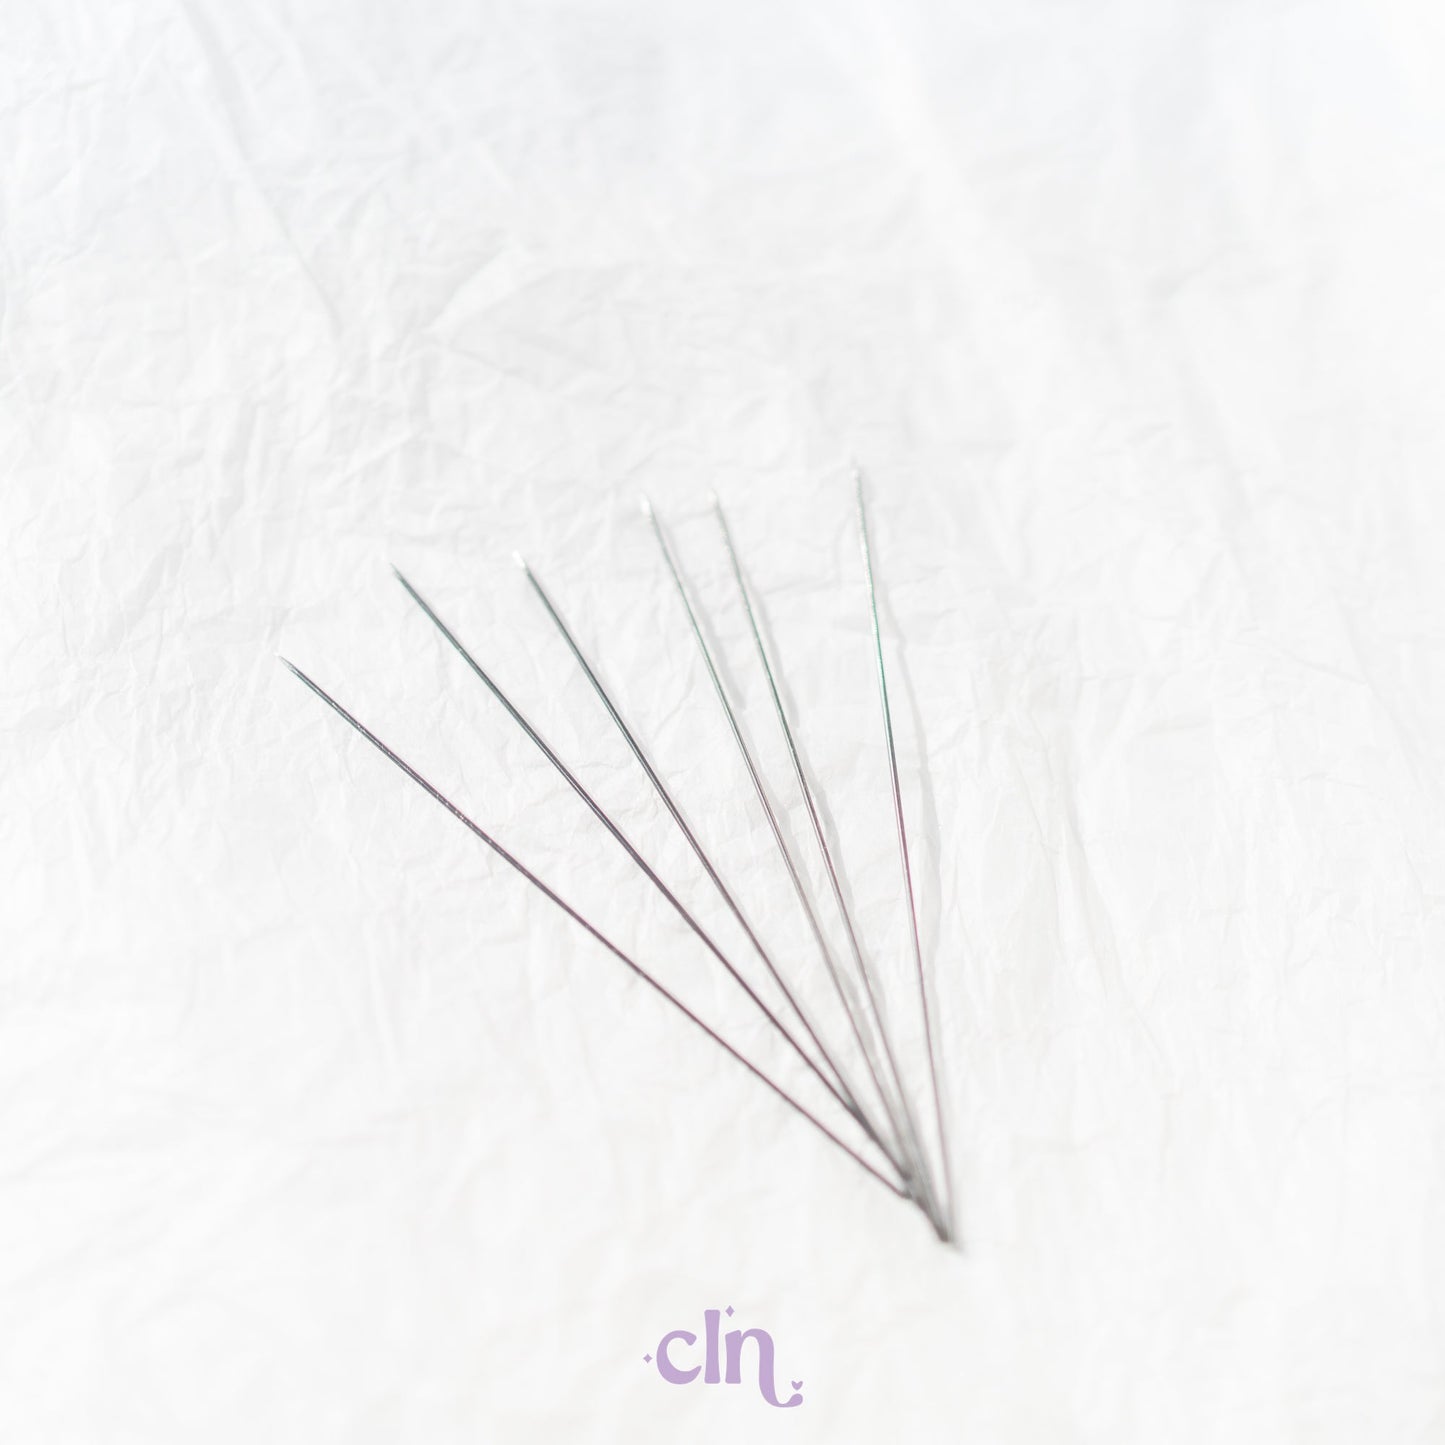 Bead piercing needles - Curated tools - CLN Atelier